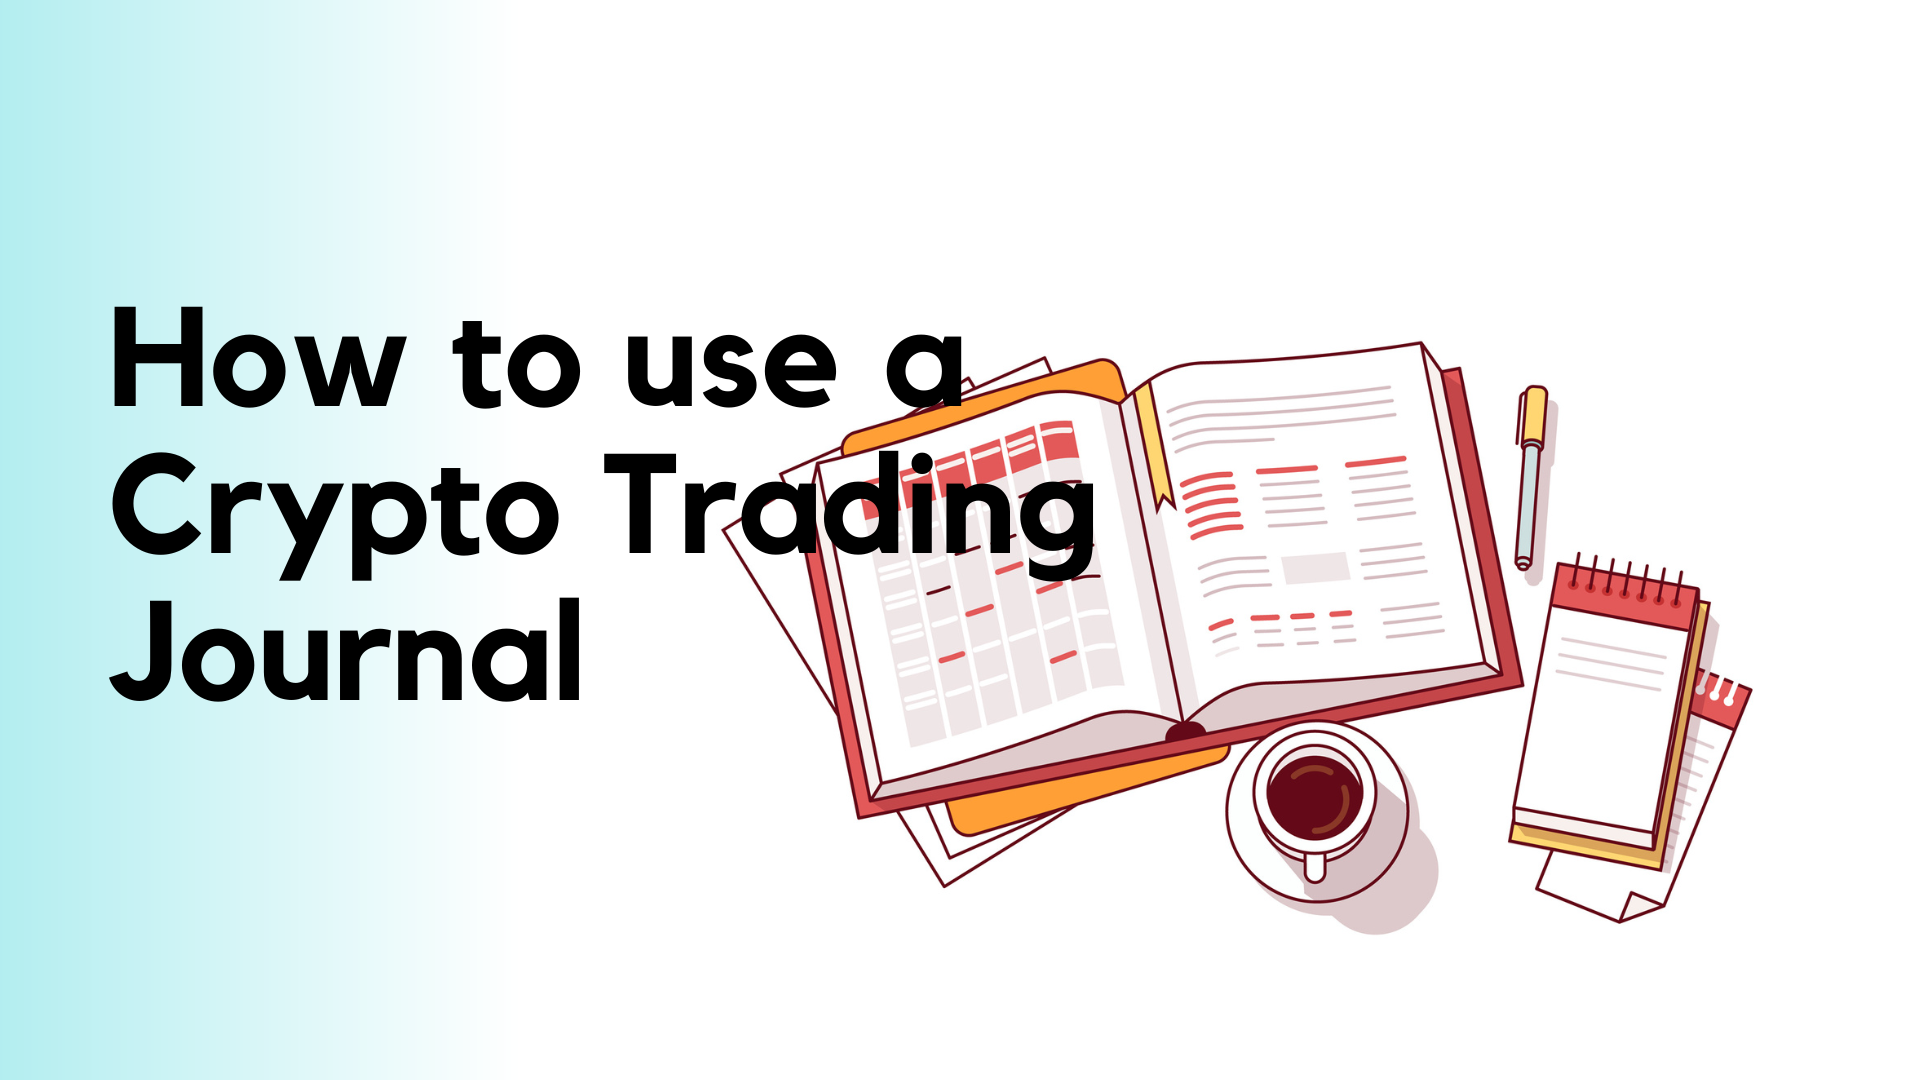 How to use a Crypto Trading Journal